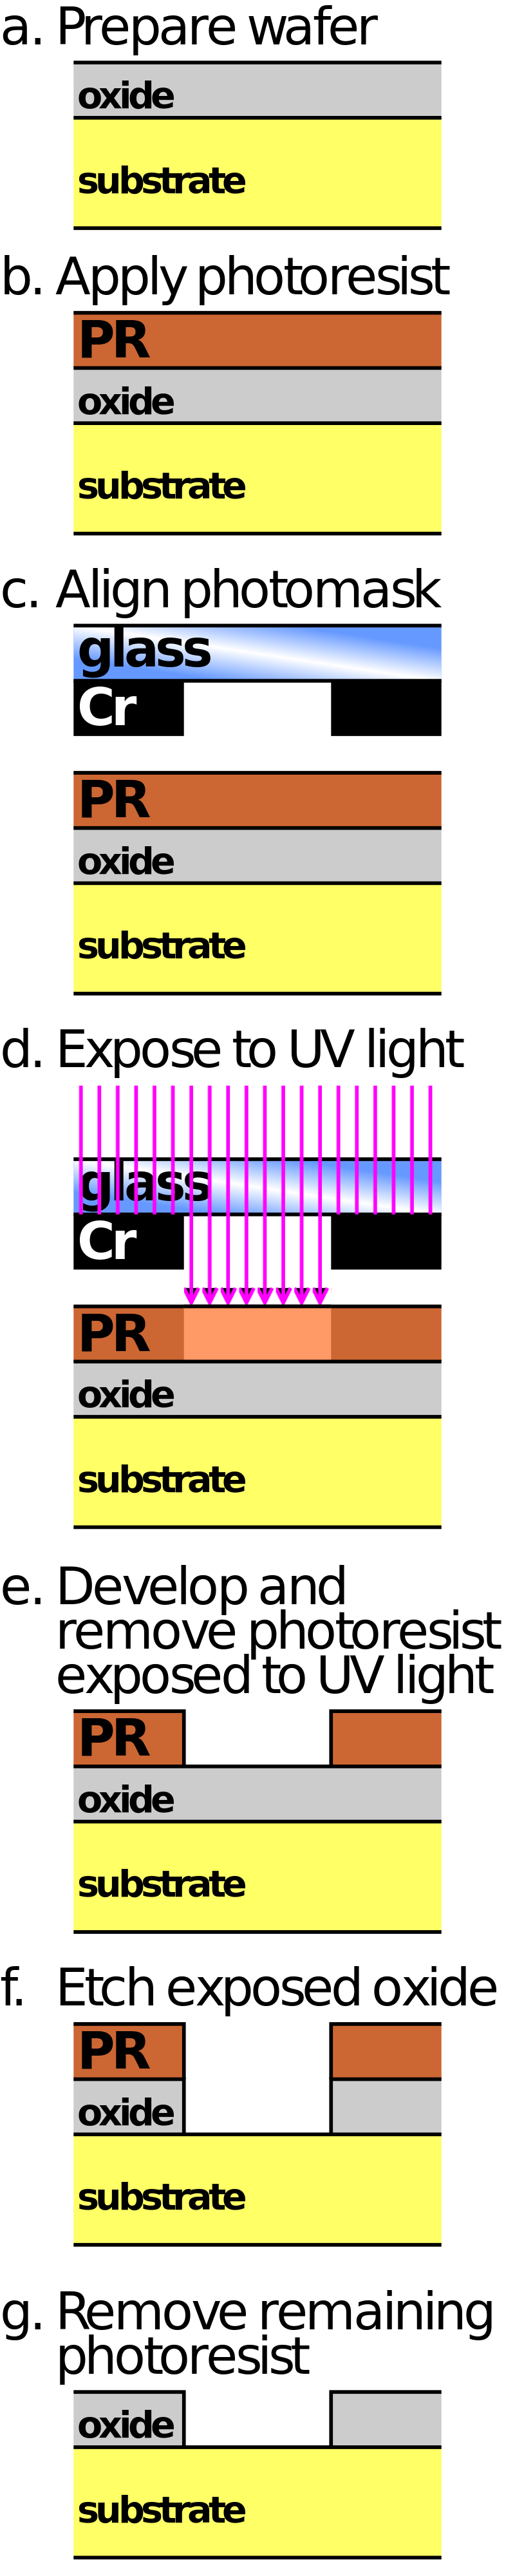 Photolithography diagram